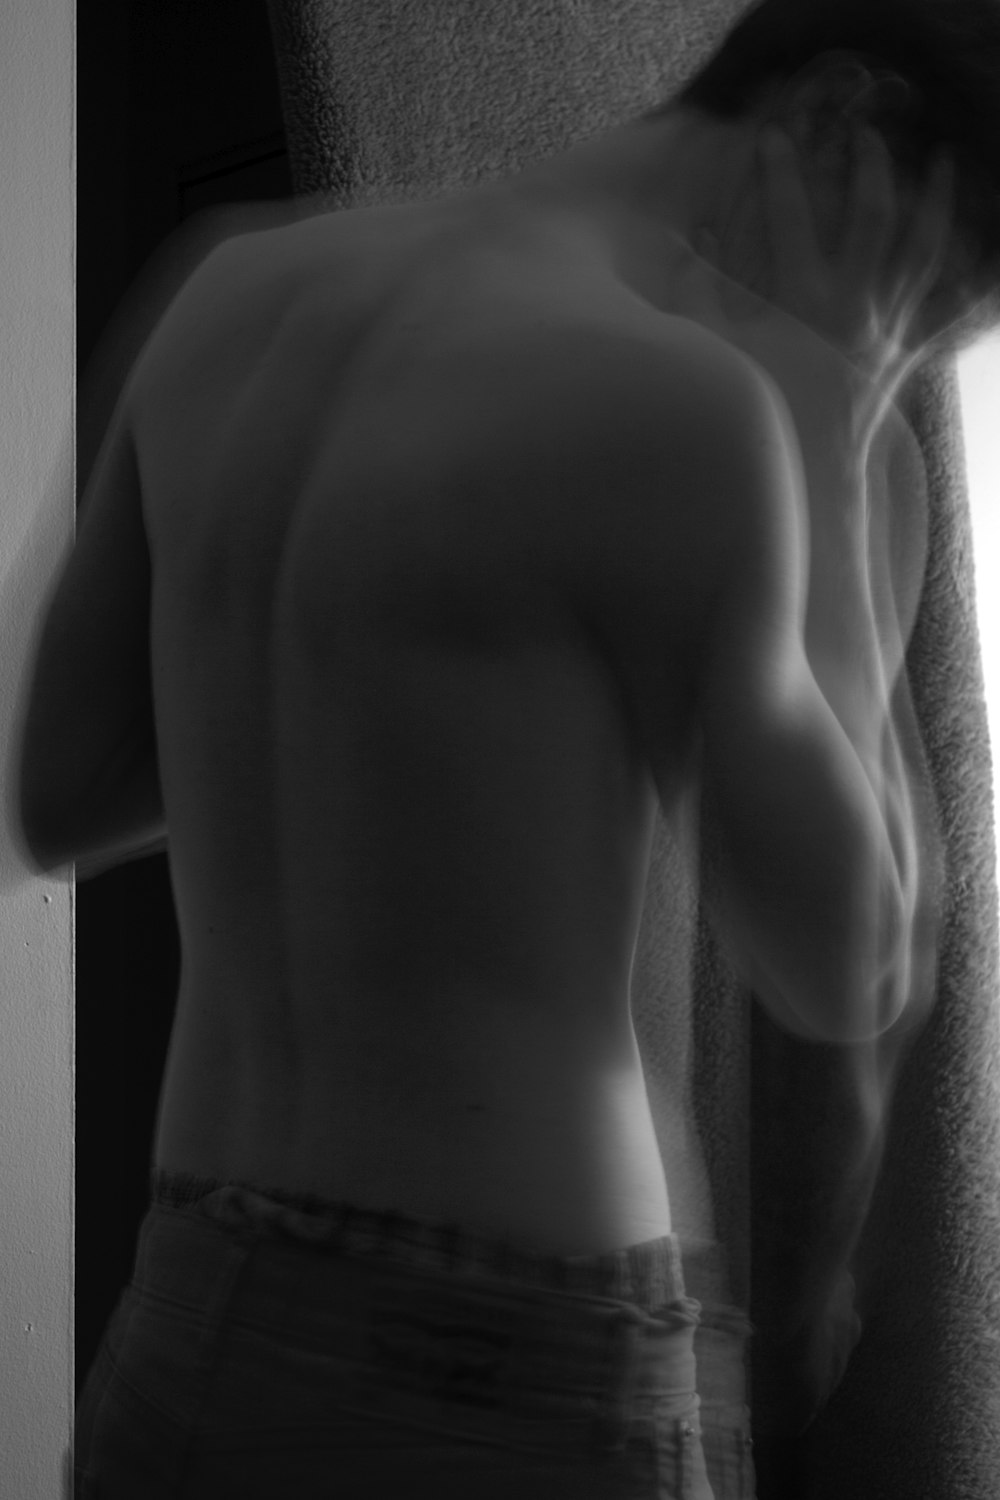 grayscale photo of person wearing bottoms